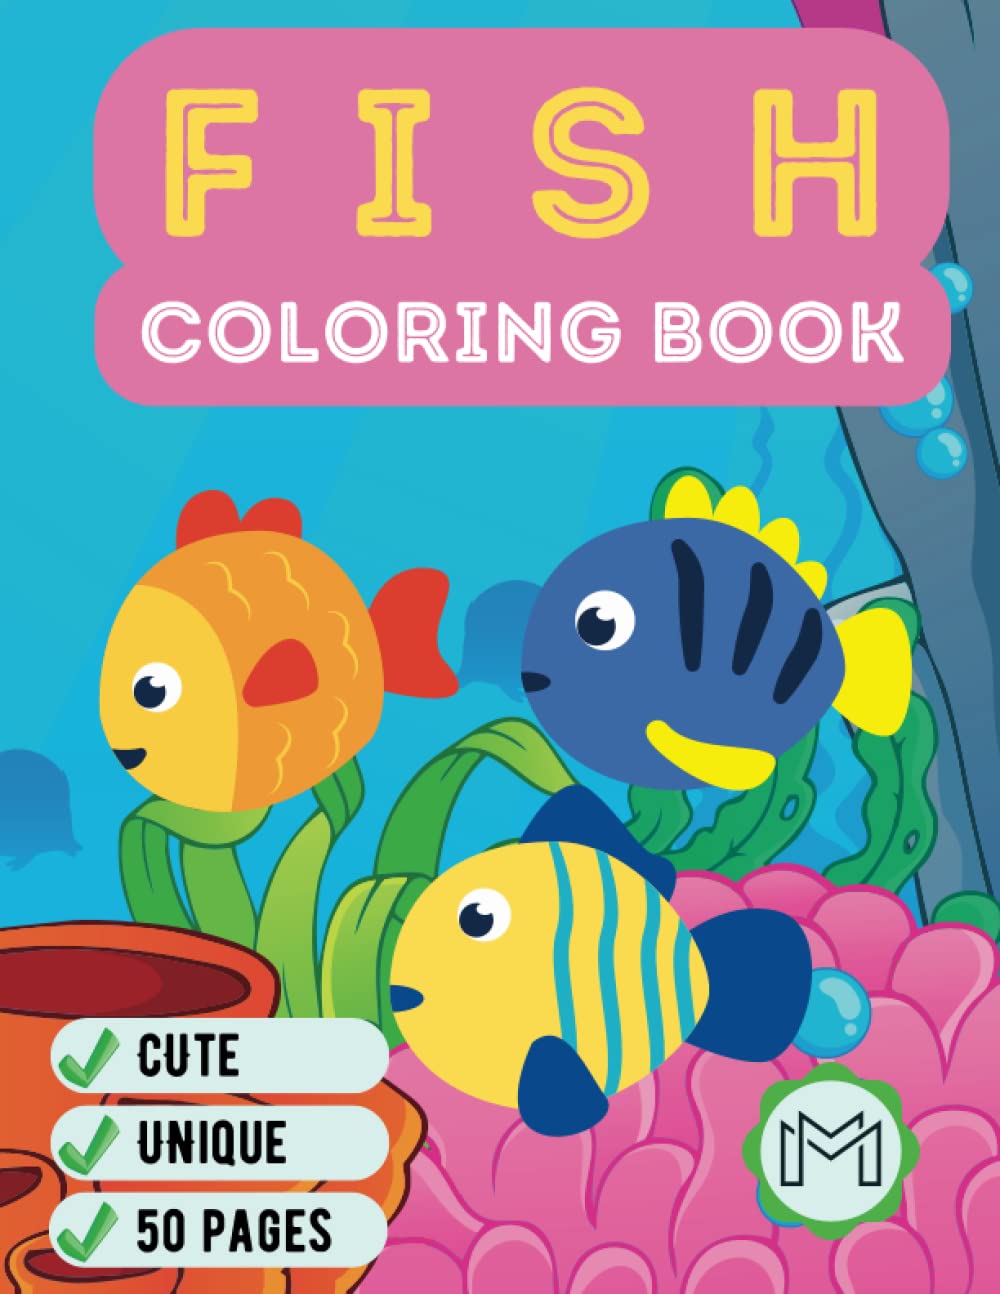 Fish Coloring Book For Kids And Adults Deep Sea Fish Unique Ocean Fresh Water Fish Amazing Sea Creature Fish Coloring Pages Under Sea Gift